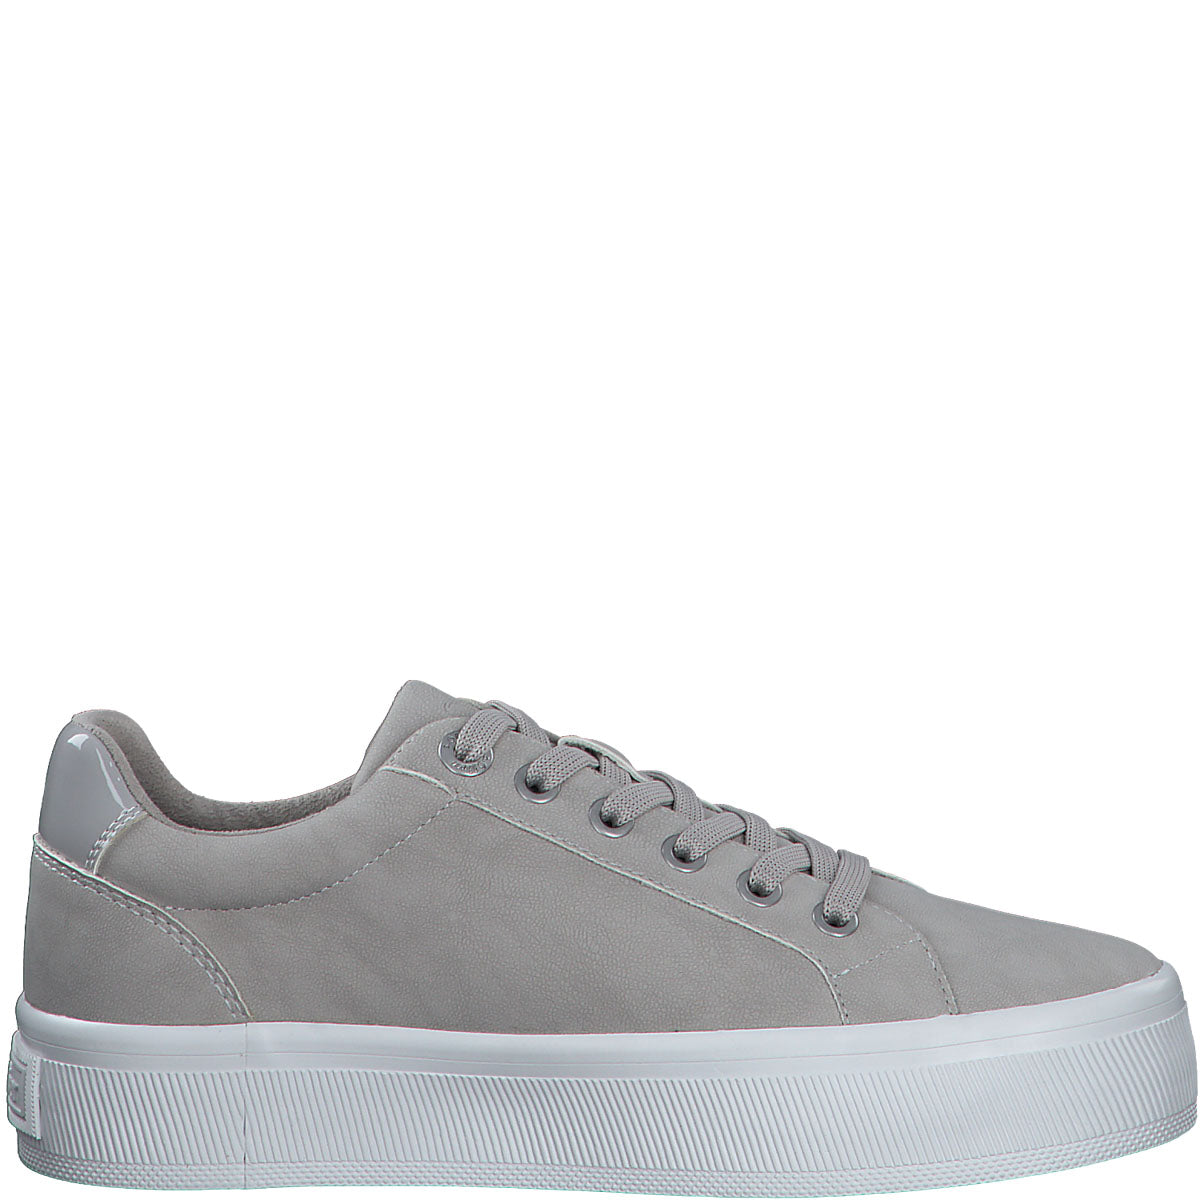 Dress to Impress Lace-Up Light Grey Runners